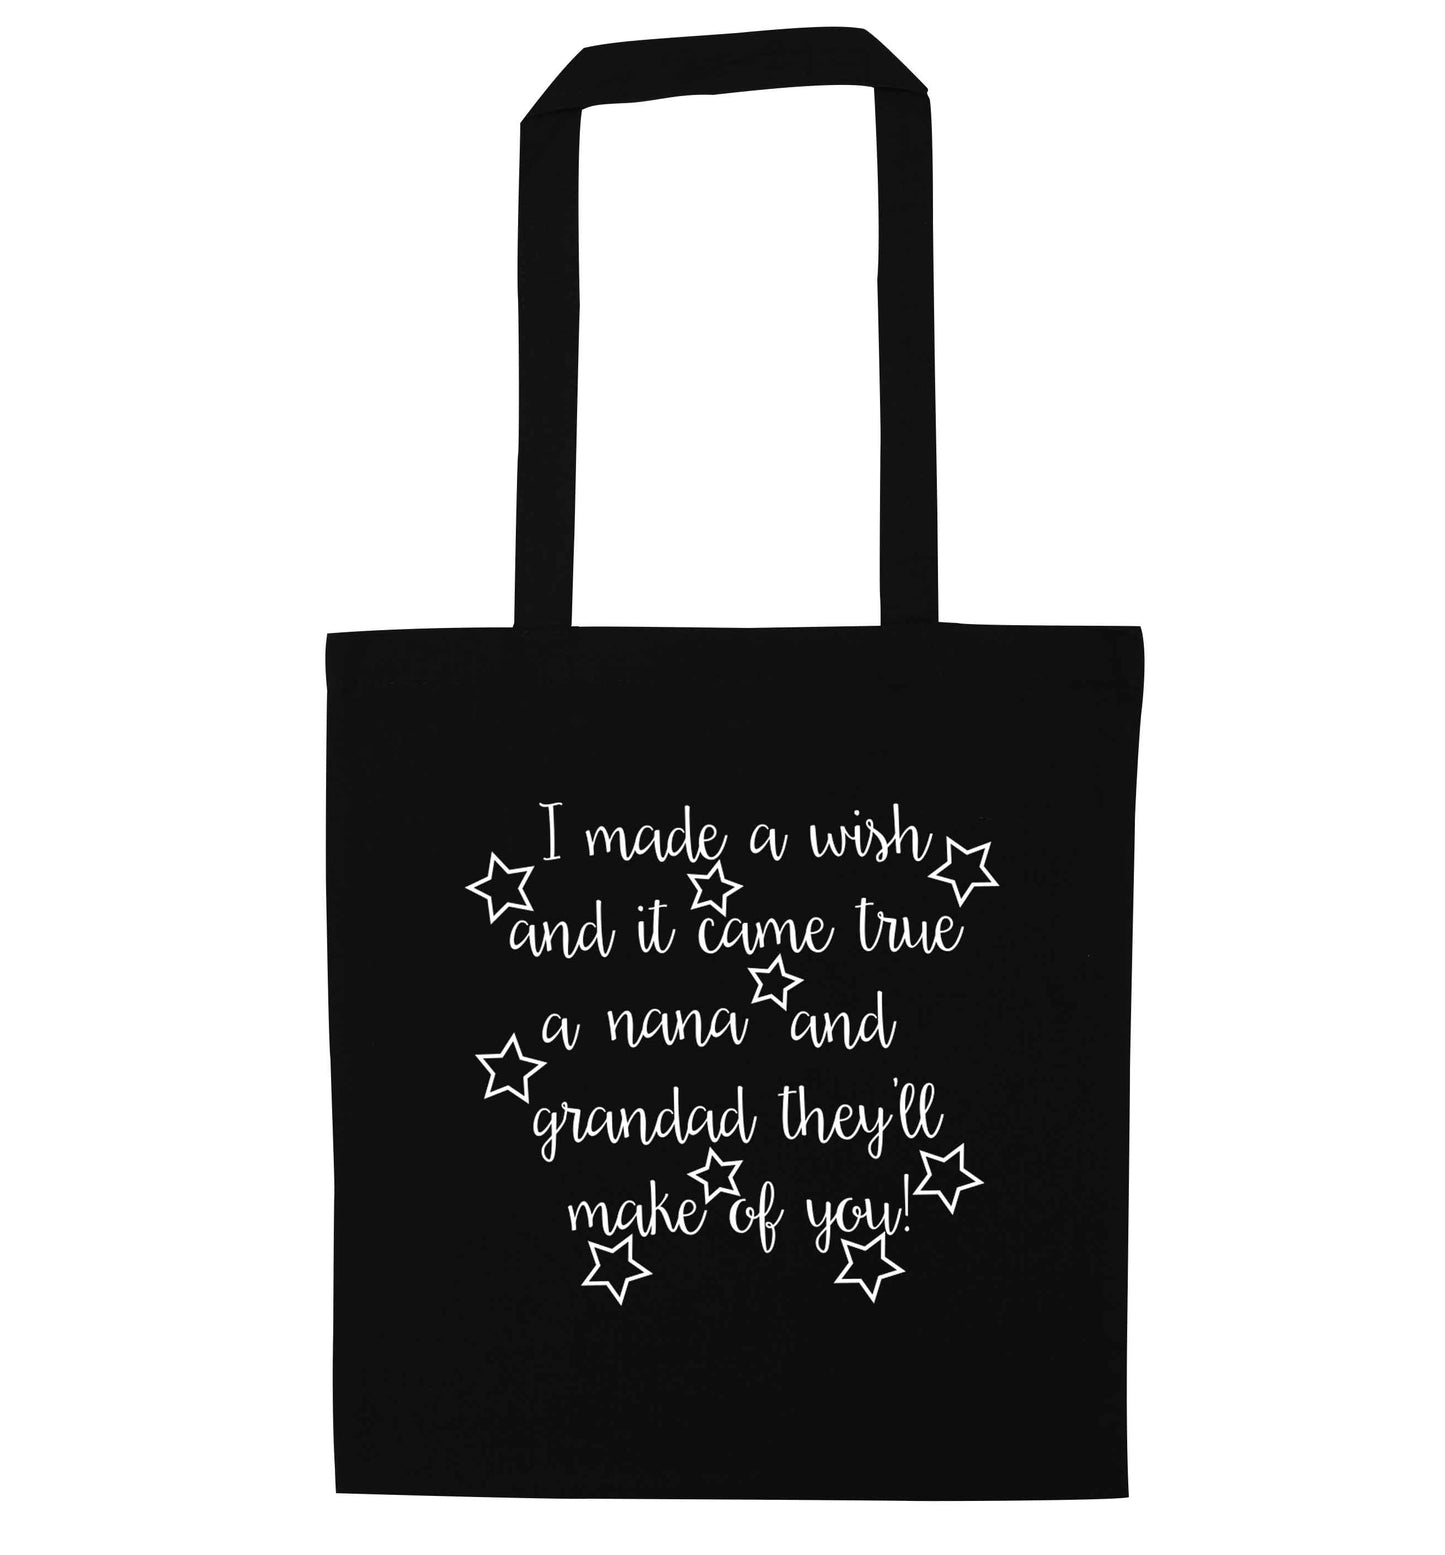 I made a wish and it came true a nana and grandad they'll make of you! black tote bag